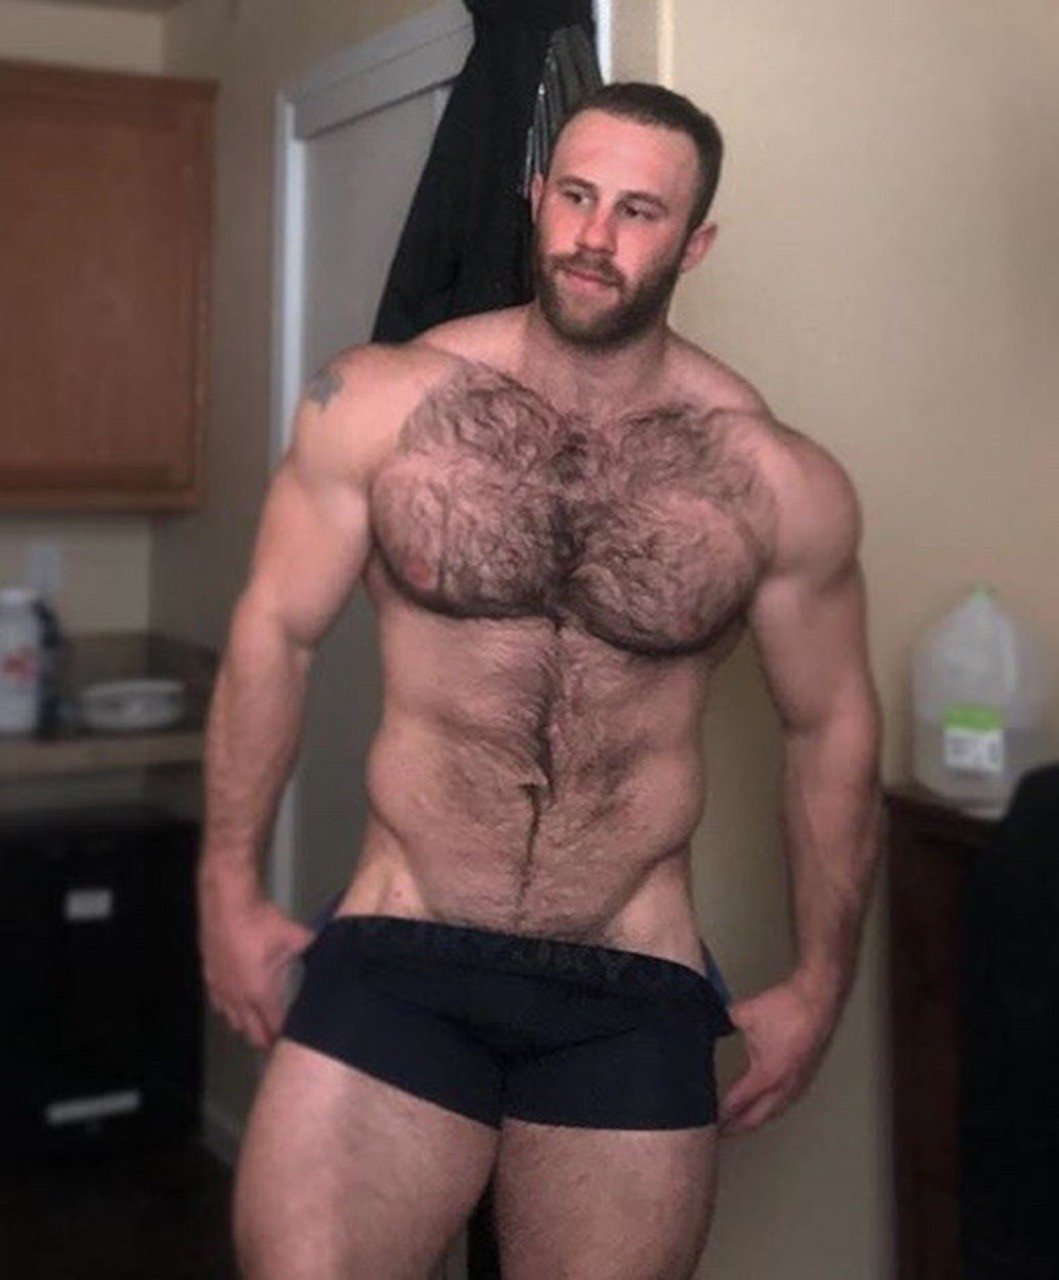 Photo by Smitty with the username @Resol702,  March 24, 2019 at 7:40 PM. The post is about the topic Gay Hairy Men